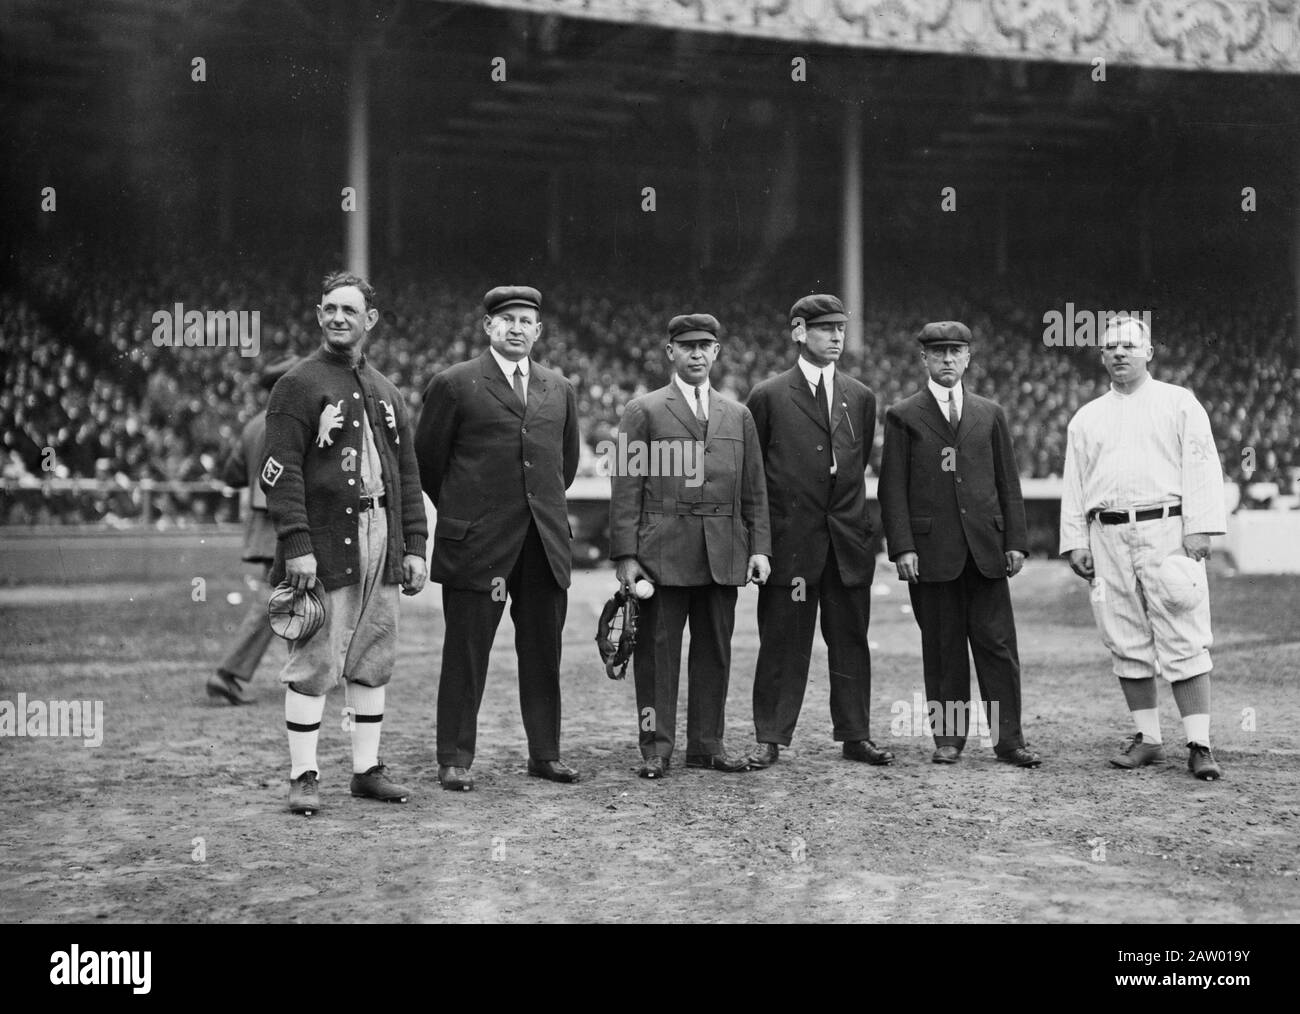 Photograph shows managers and umpires before Game One of the 1913 World Series on October 7 at the Polo Grounds in New York City. From left to right: Danny Murphy, Philadelphia Athletics team captain; Cy Rigler, left-field umpire; Bill Klem, home plate; John Joseph (Rip) Egan, infield; Tom Connolly, right field; and John McGraw, manager of the New York Giants. Stock Photo